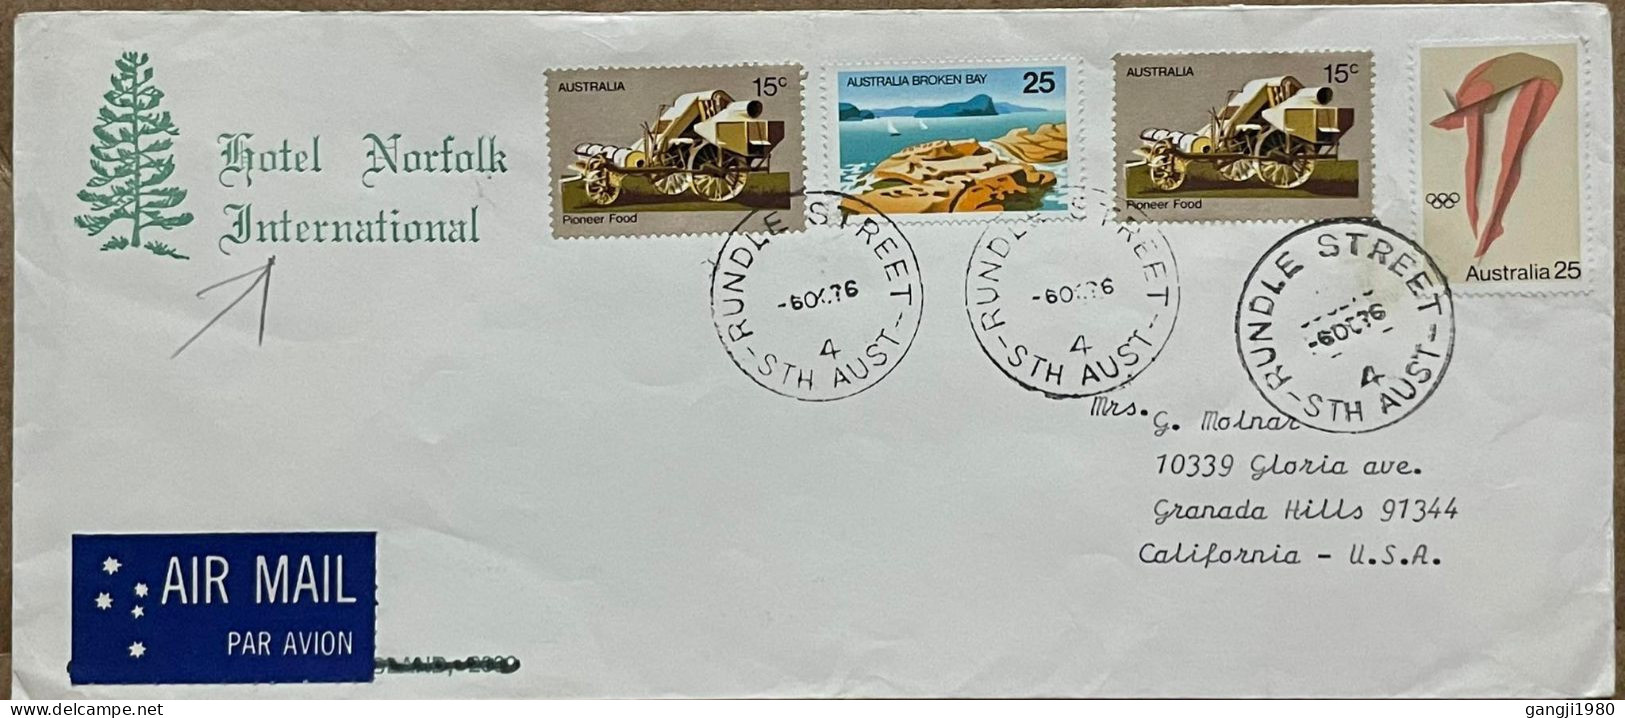 AUSTRALIA 1976, HOTEL NORFOLK ADVERTISING COVER, USED TO USA, PIONEER FOOD, BROKEN BAY, OLYMPIC GAME DIVING, 4 STAMP, RU - Covers & Documents